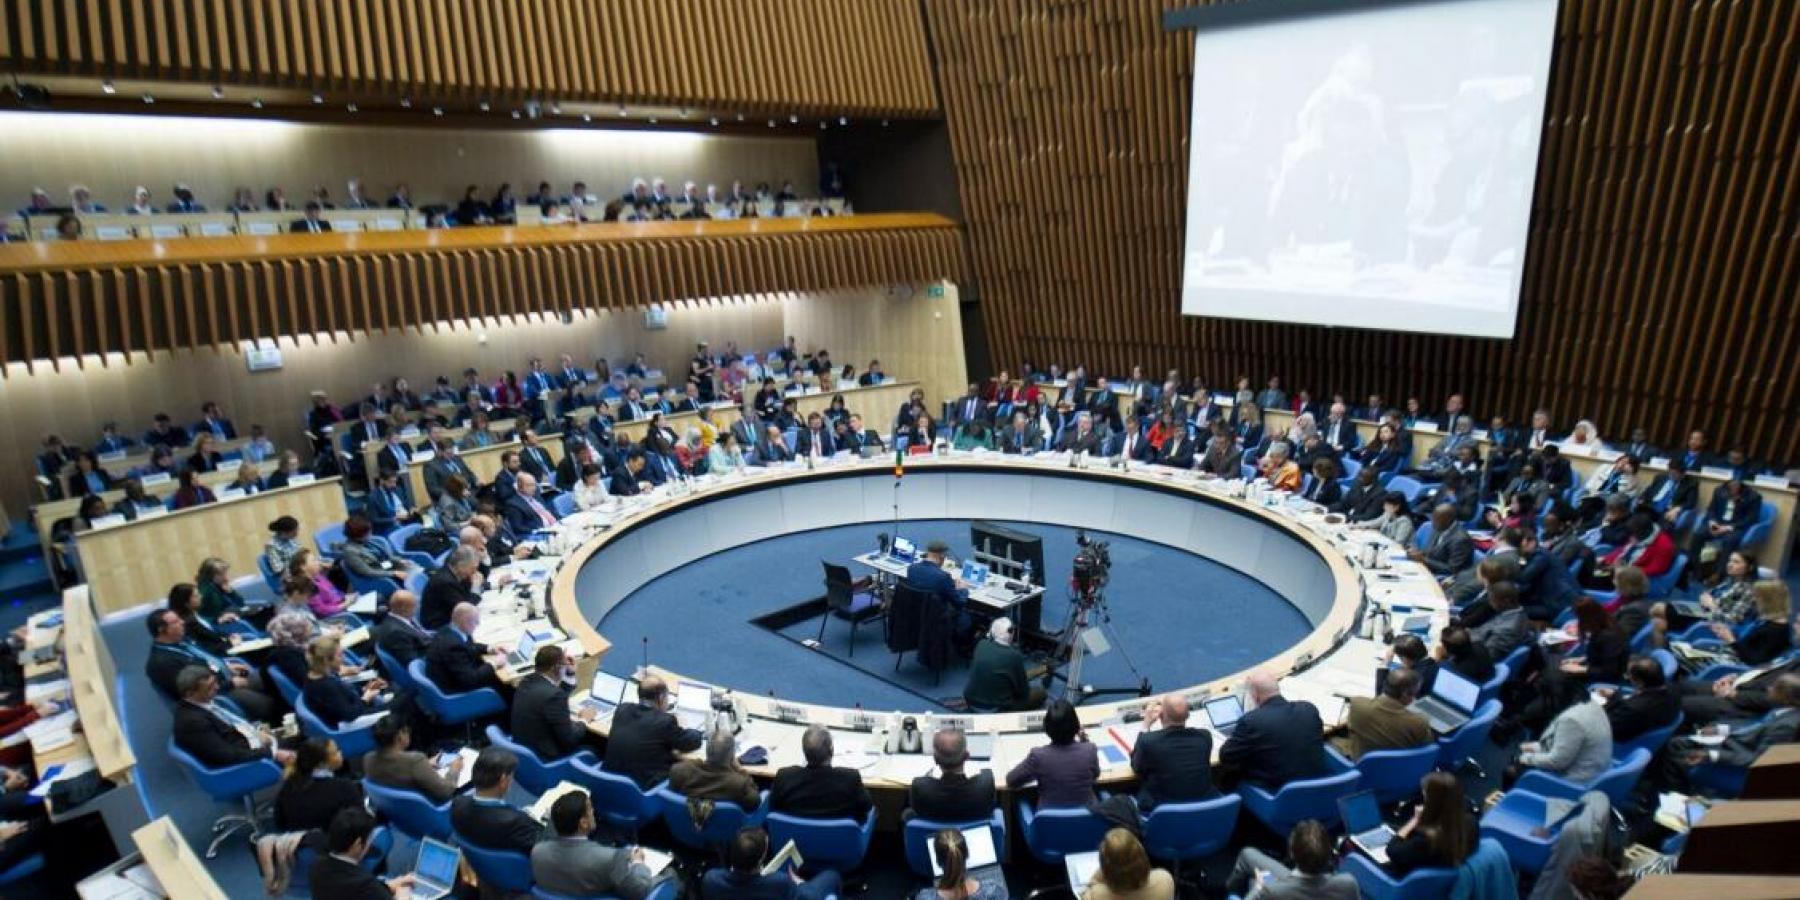 Photo of the 142nd meeting of the WHO Executive Board